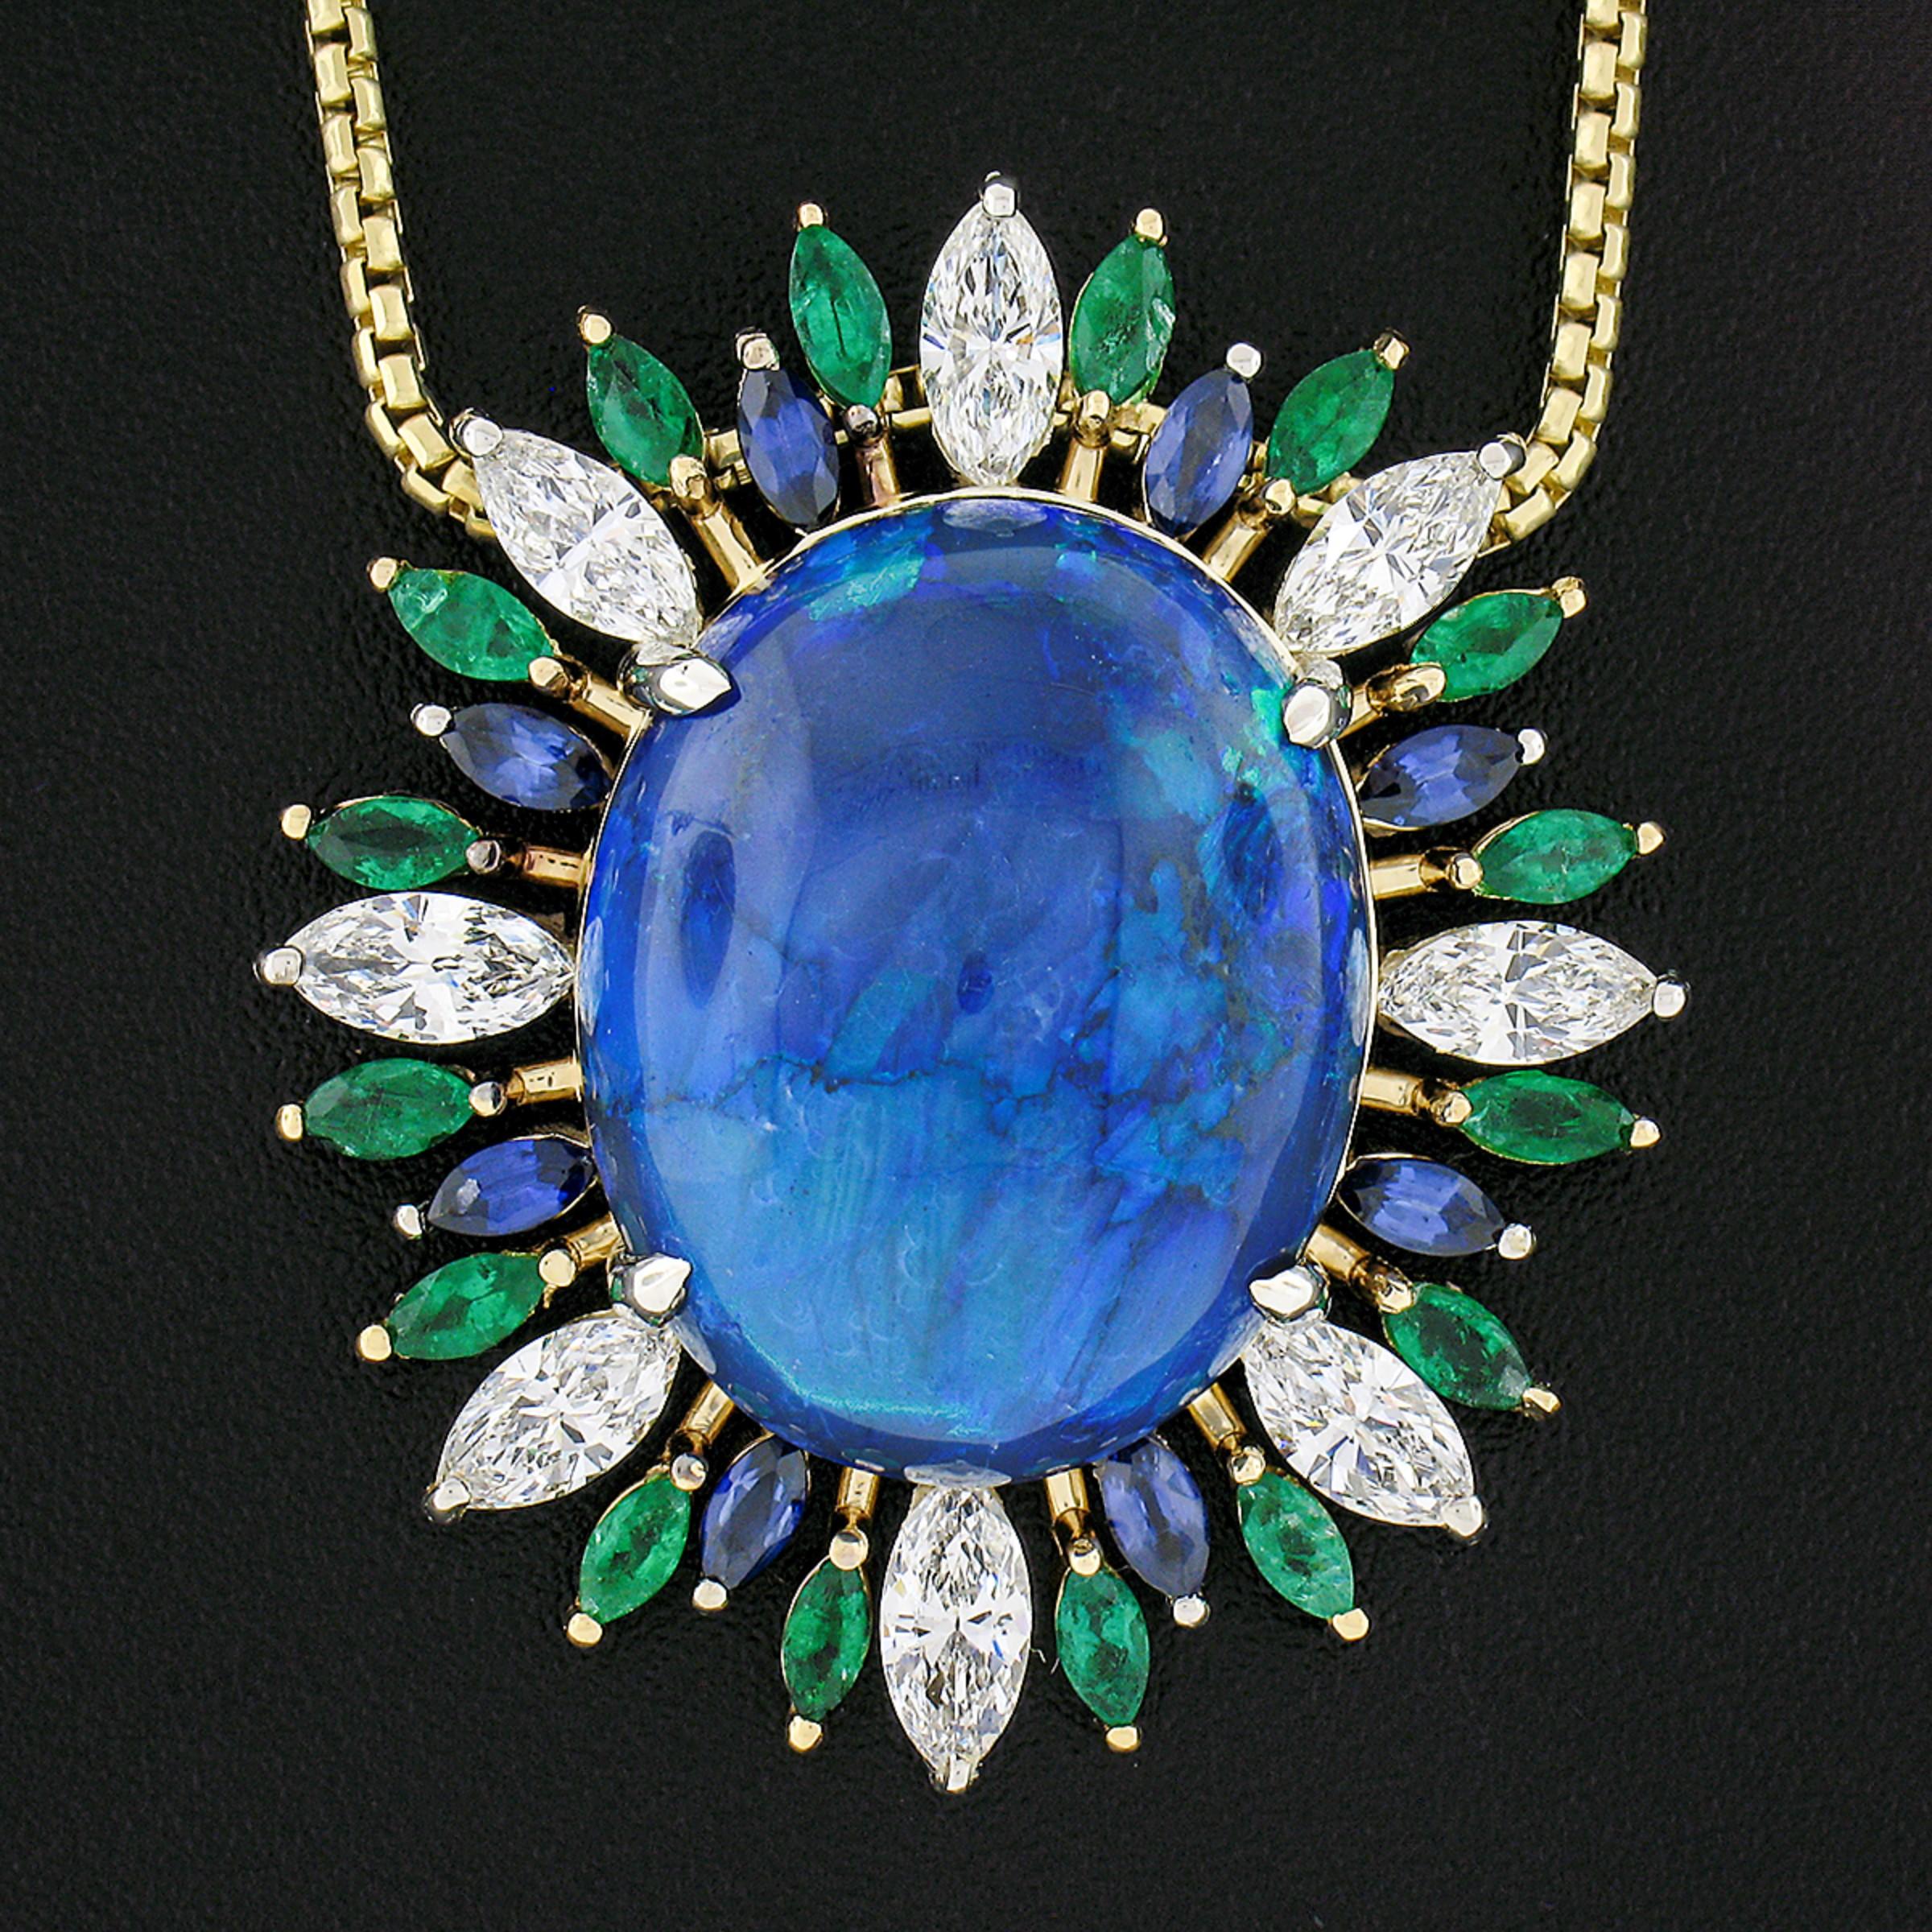 Here we have an absolutely magnificent and jaw dropping pendant that that is well crafted from solid 18k yellow and white gold. The pendant features a gorgeous, GIA certified, gray opal that is 100% natural and weighs exactly 19.49 carats. The oval